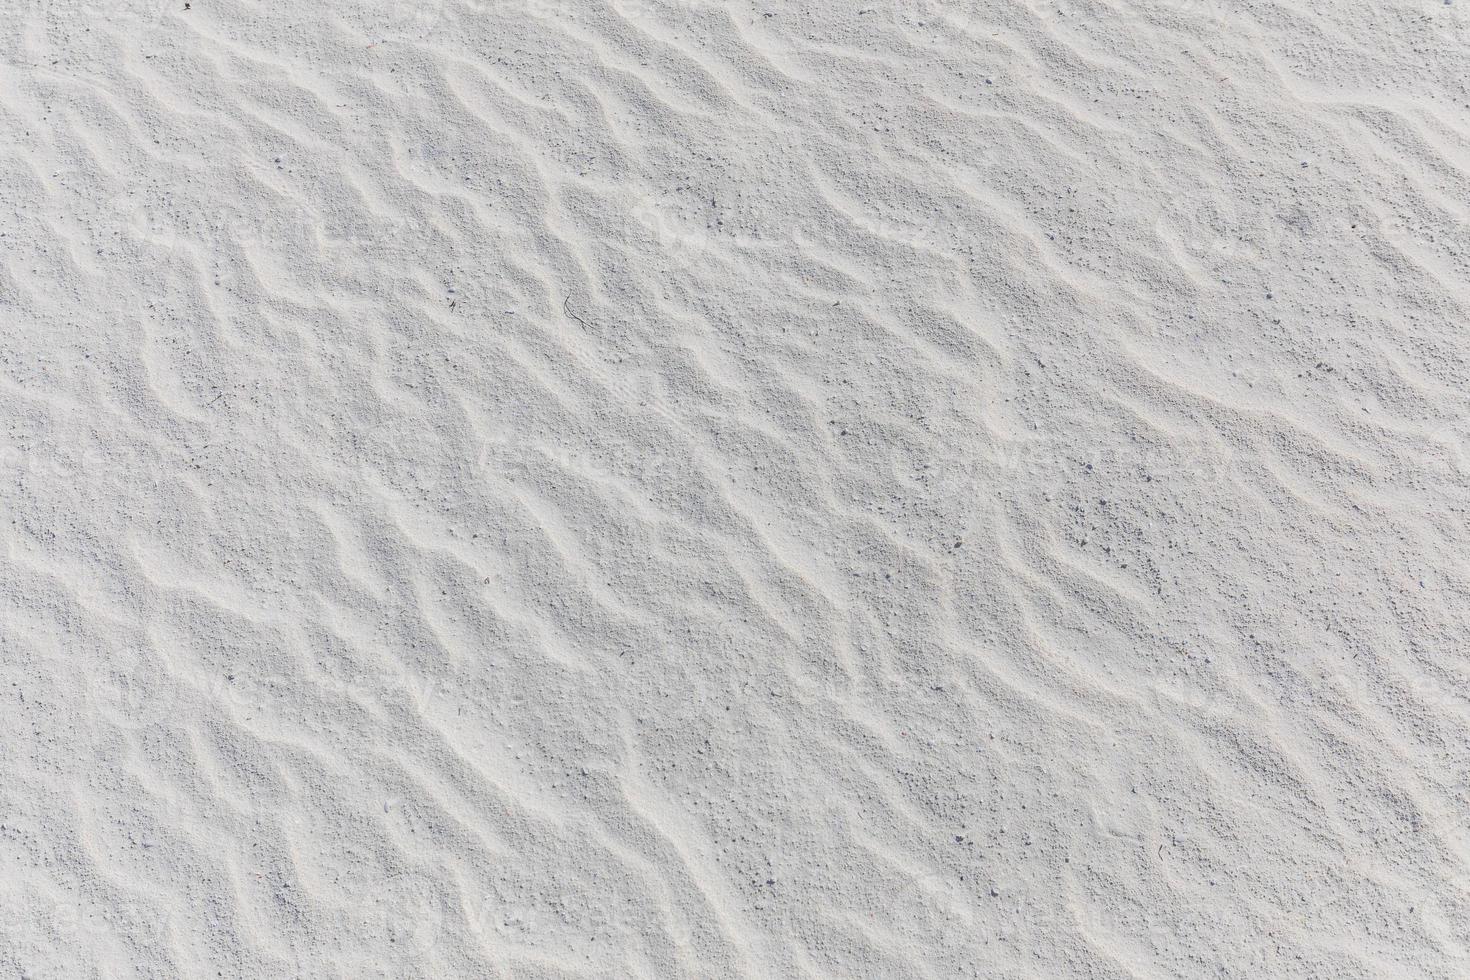 Close up sand texture on beach in summer. White sand natural beach pattern photo